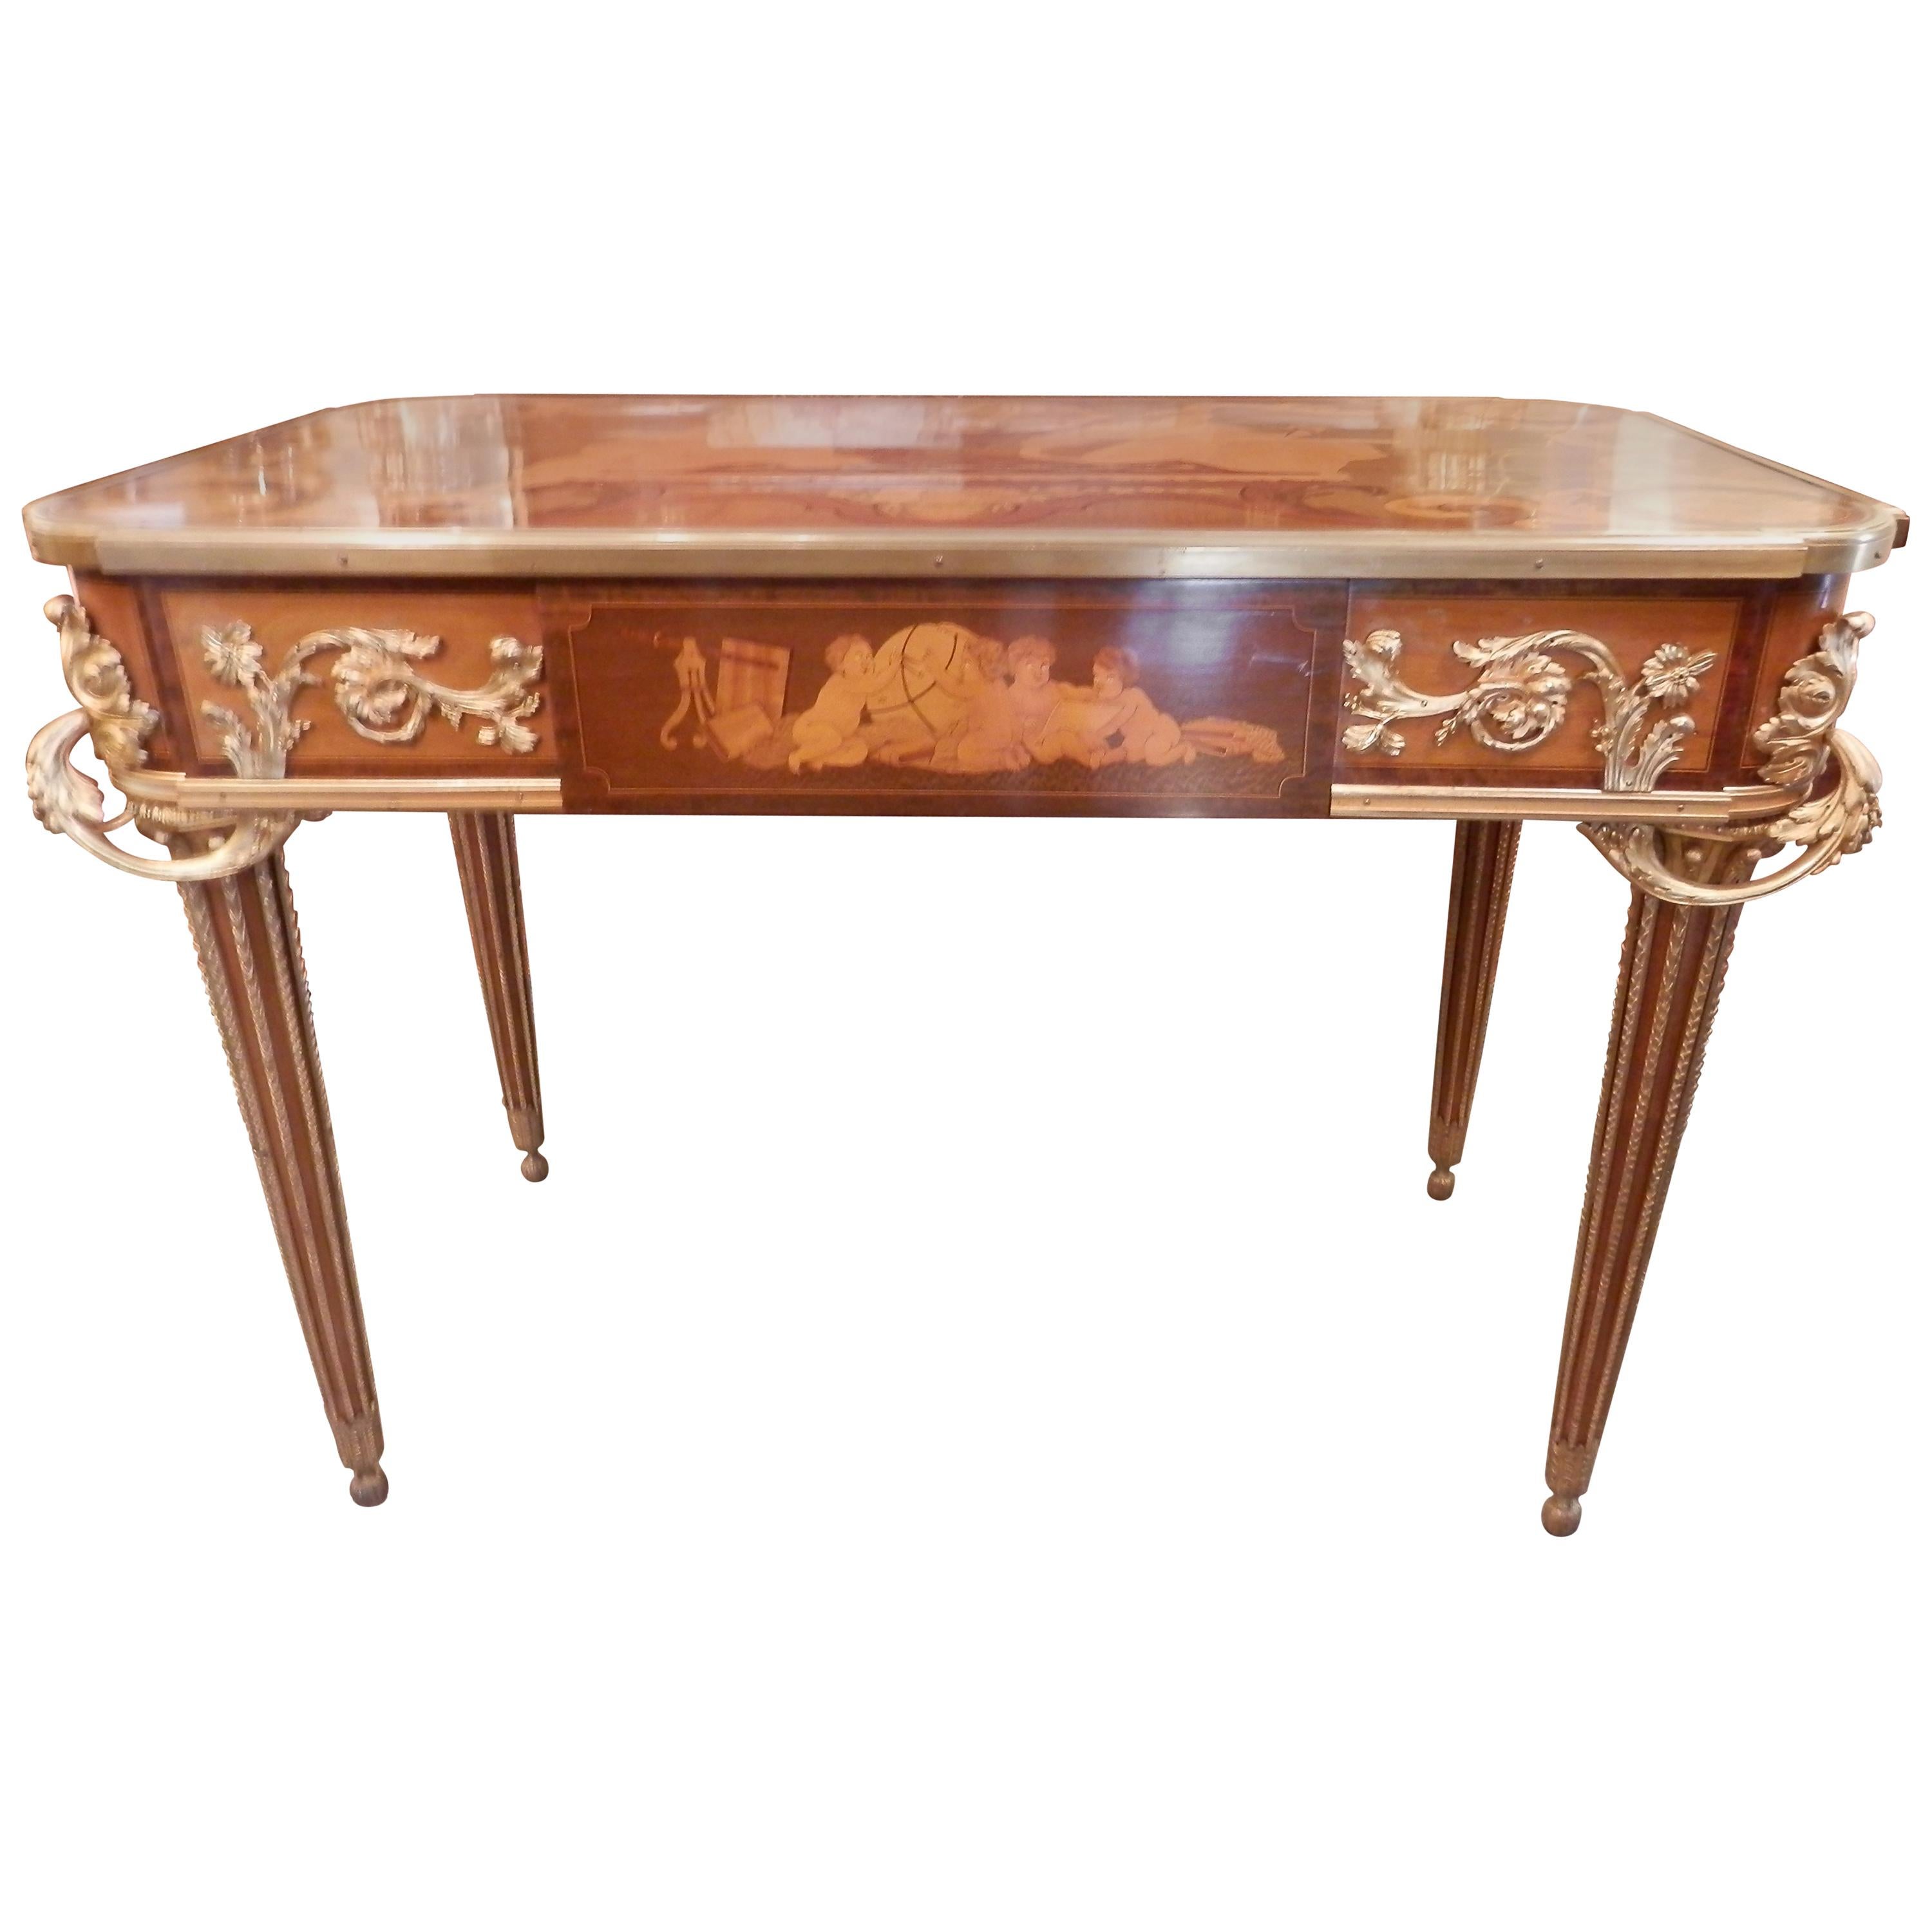 Very Fine French Inlayed and Gilt Bronze Console Signed Alfred Beurdeley